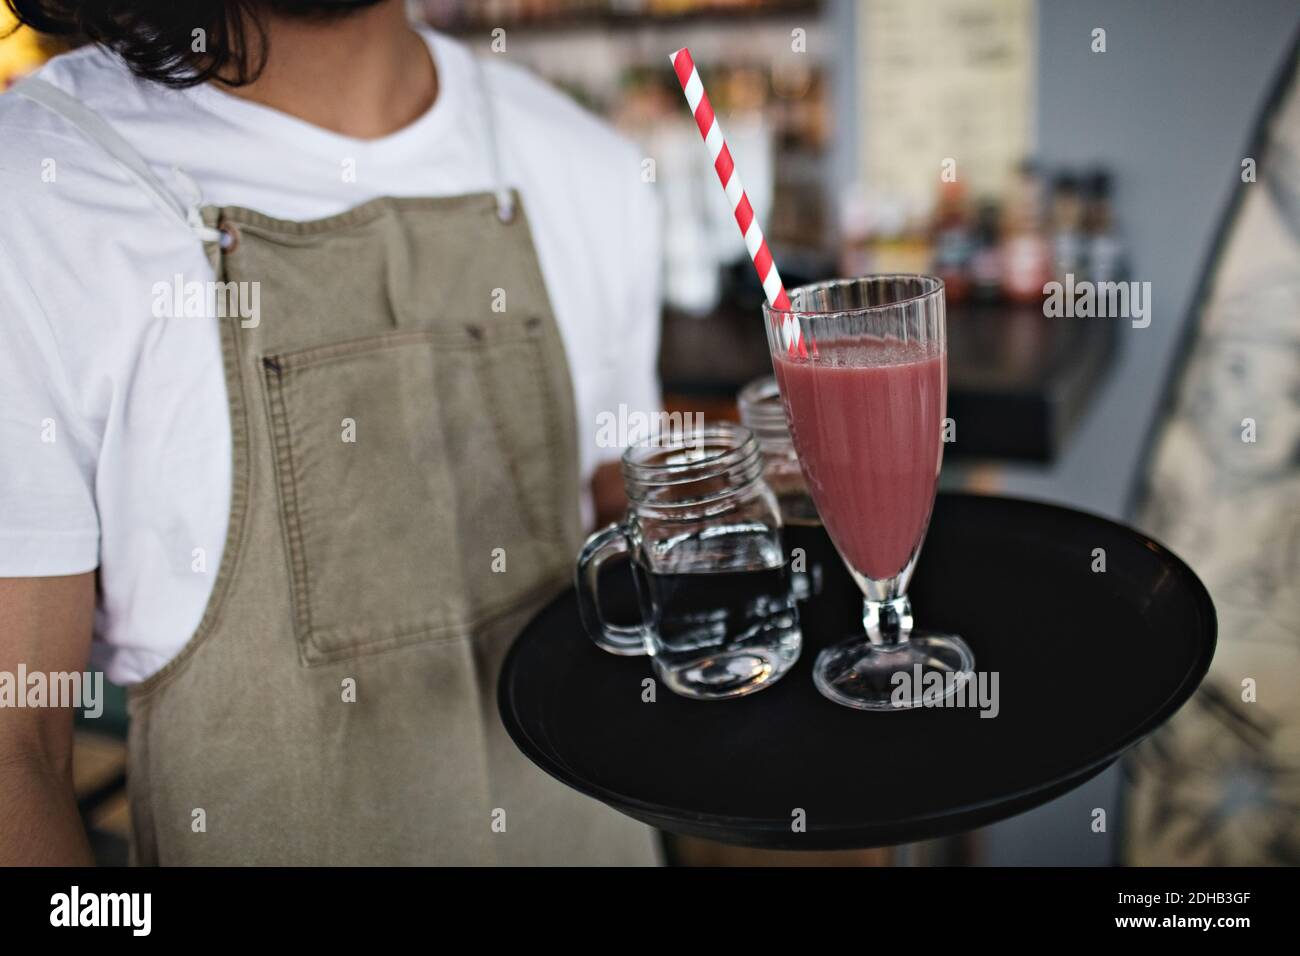 Midsection of owner holding drink in serving tray at restaurant Stock Photo